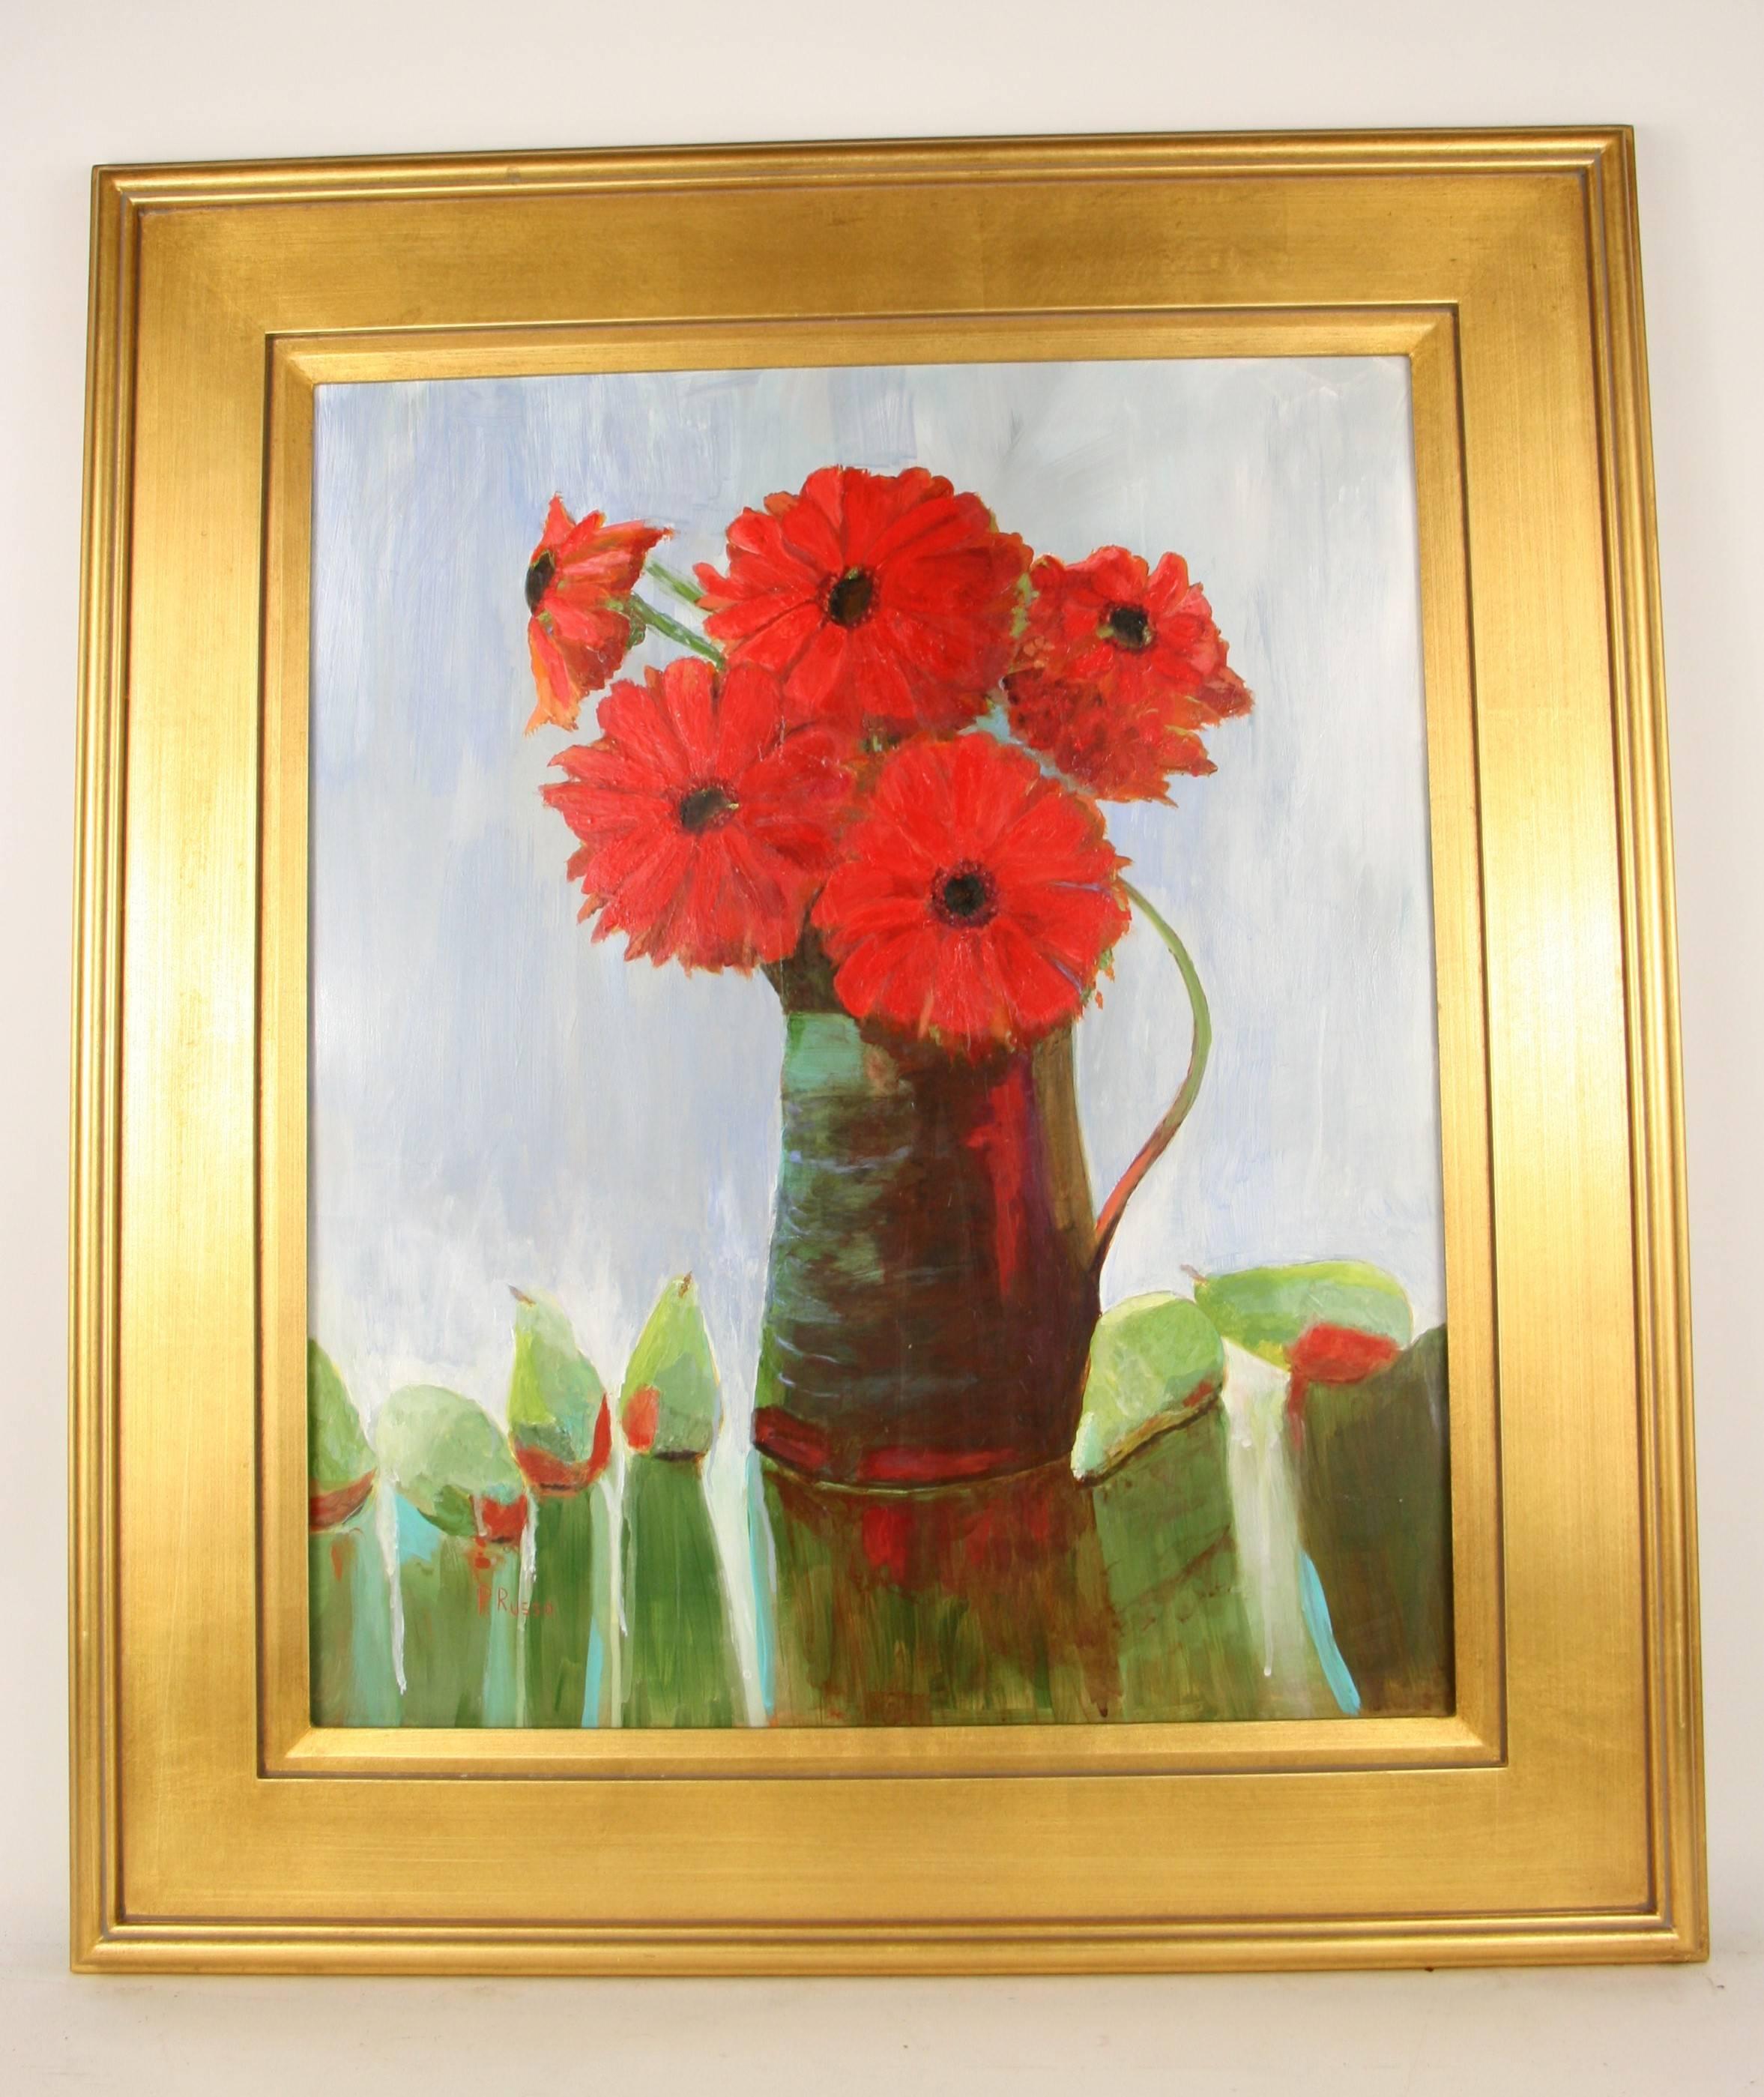 #5-2900 A red bouquet in a pitcher, contemporary still life,acrylic on board displayed in a gilt wood frame ,signed lower left by P.Russo.Image size 19.5 H x 23 W